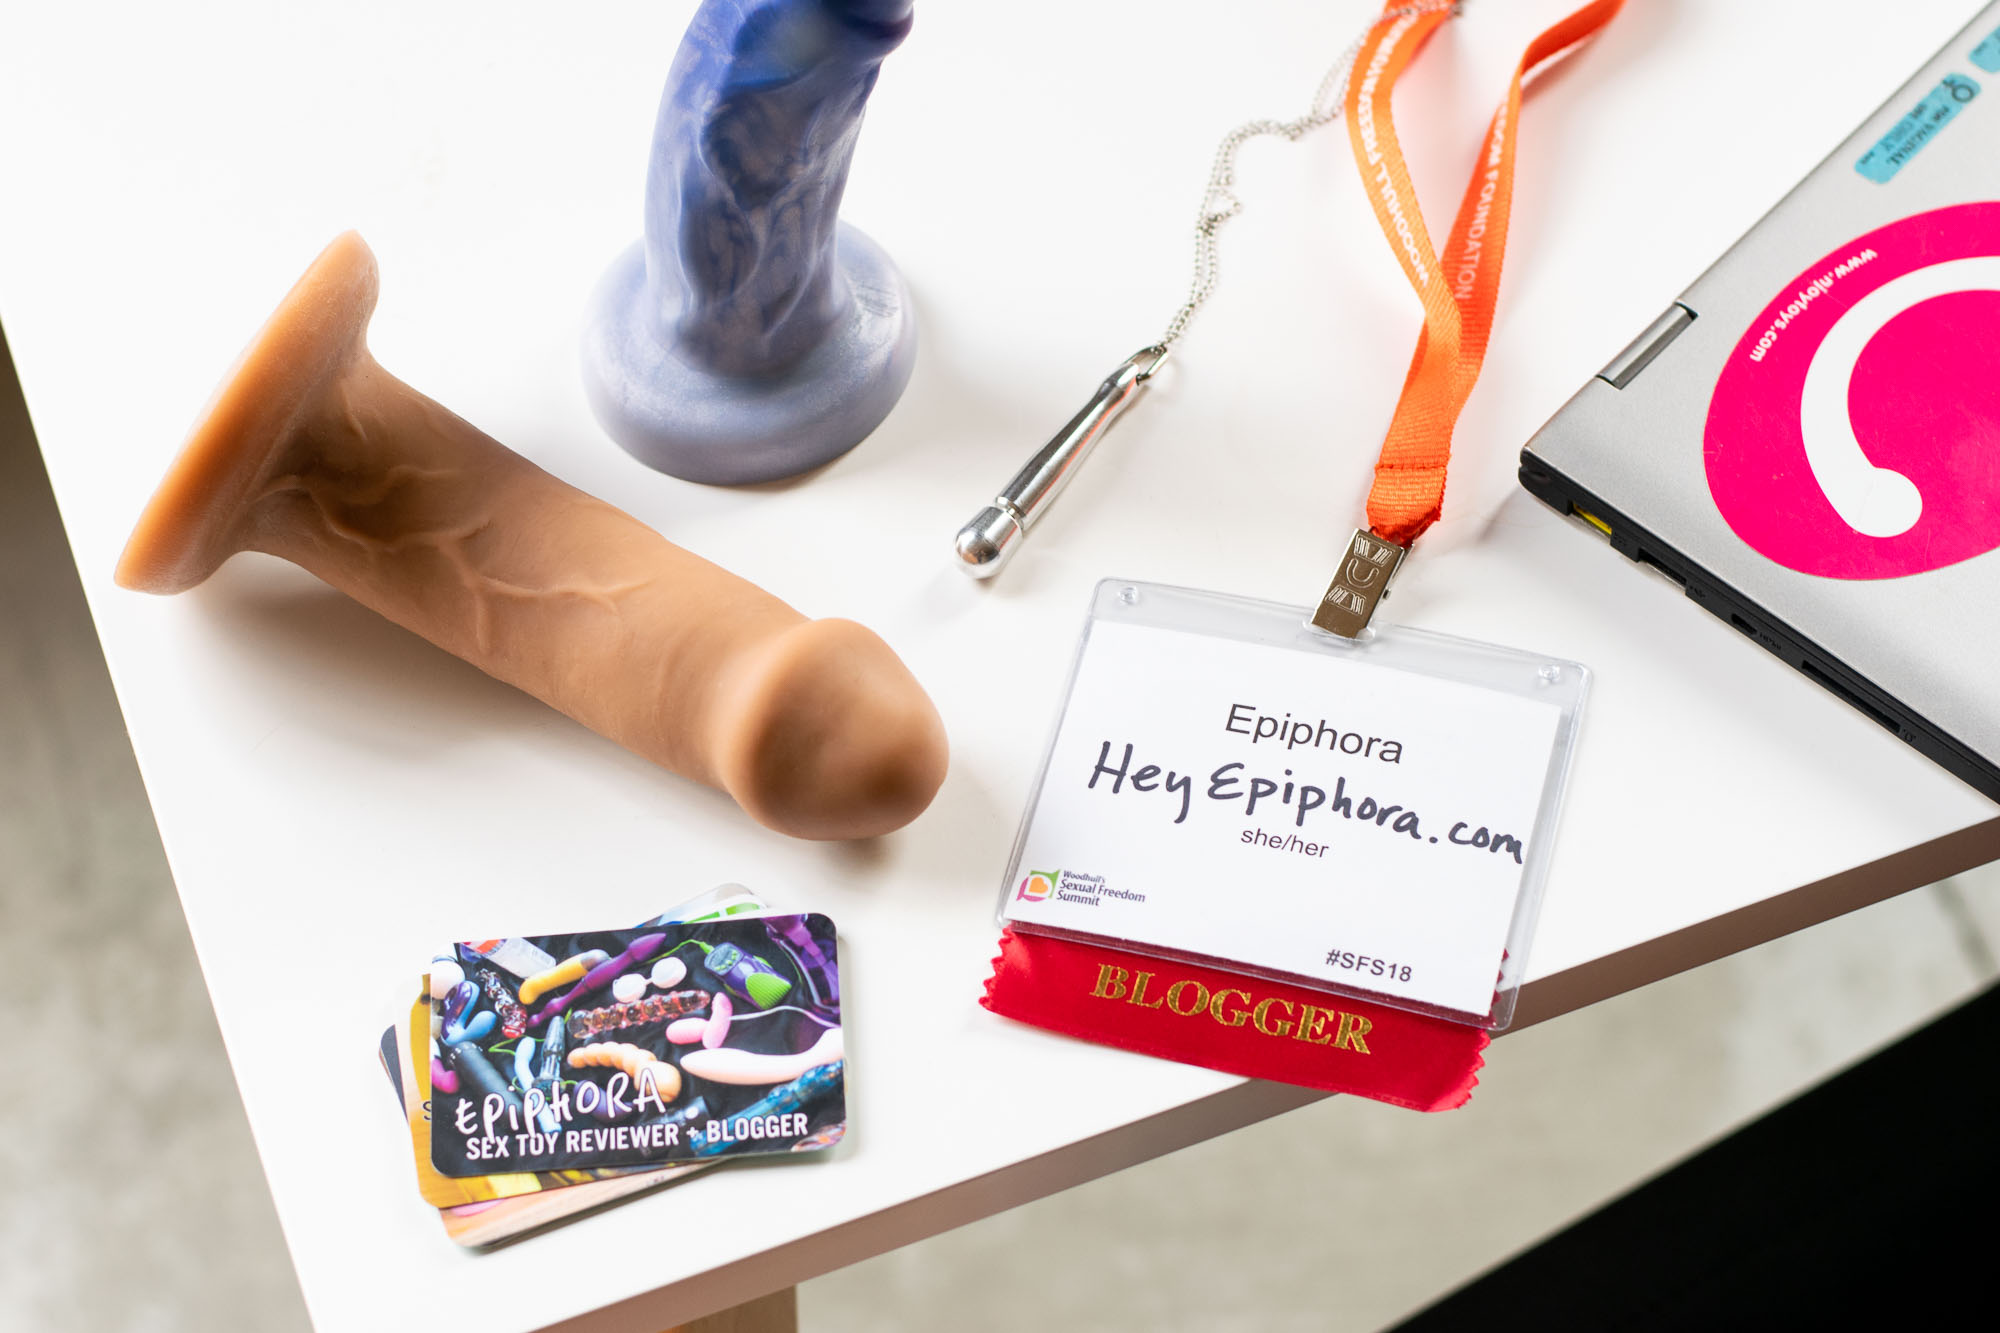 Sex blogger business cards, a conference badge, a Doxy necklace, and two amazing dildos: Buck and Splendid.